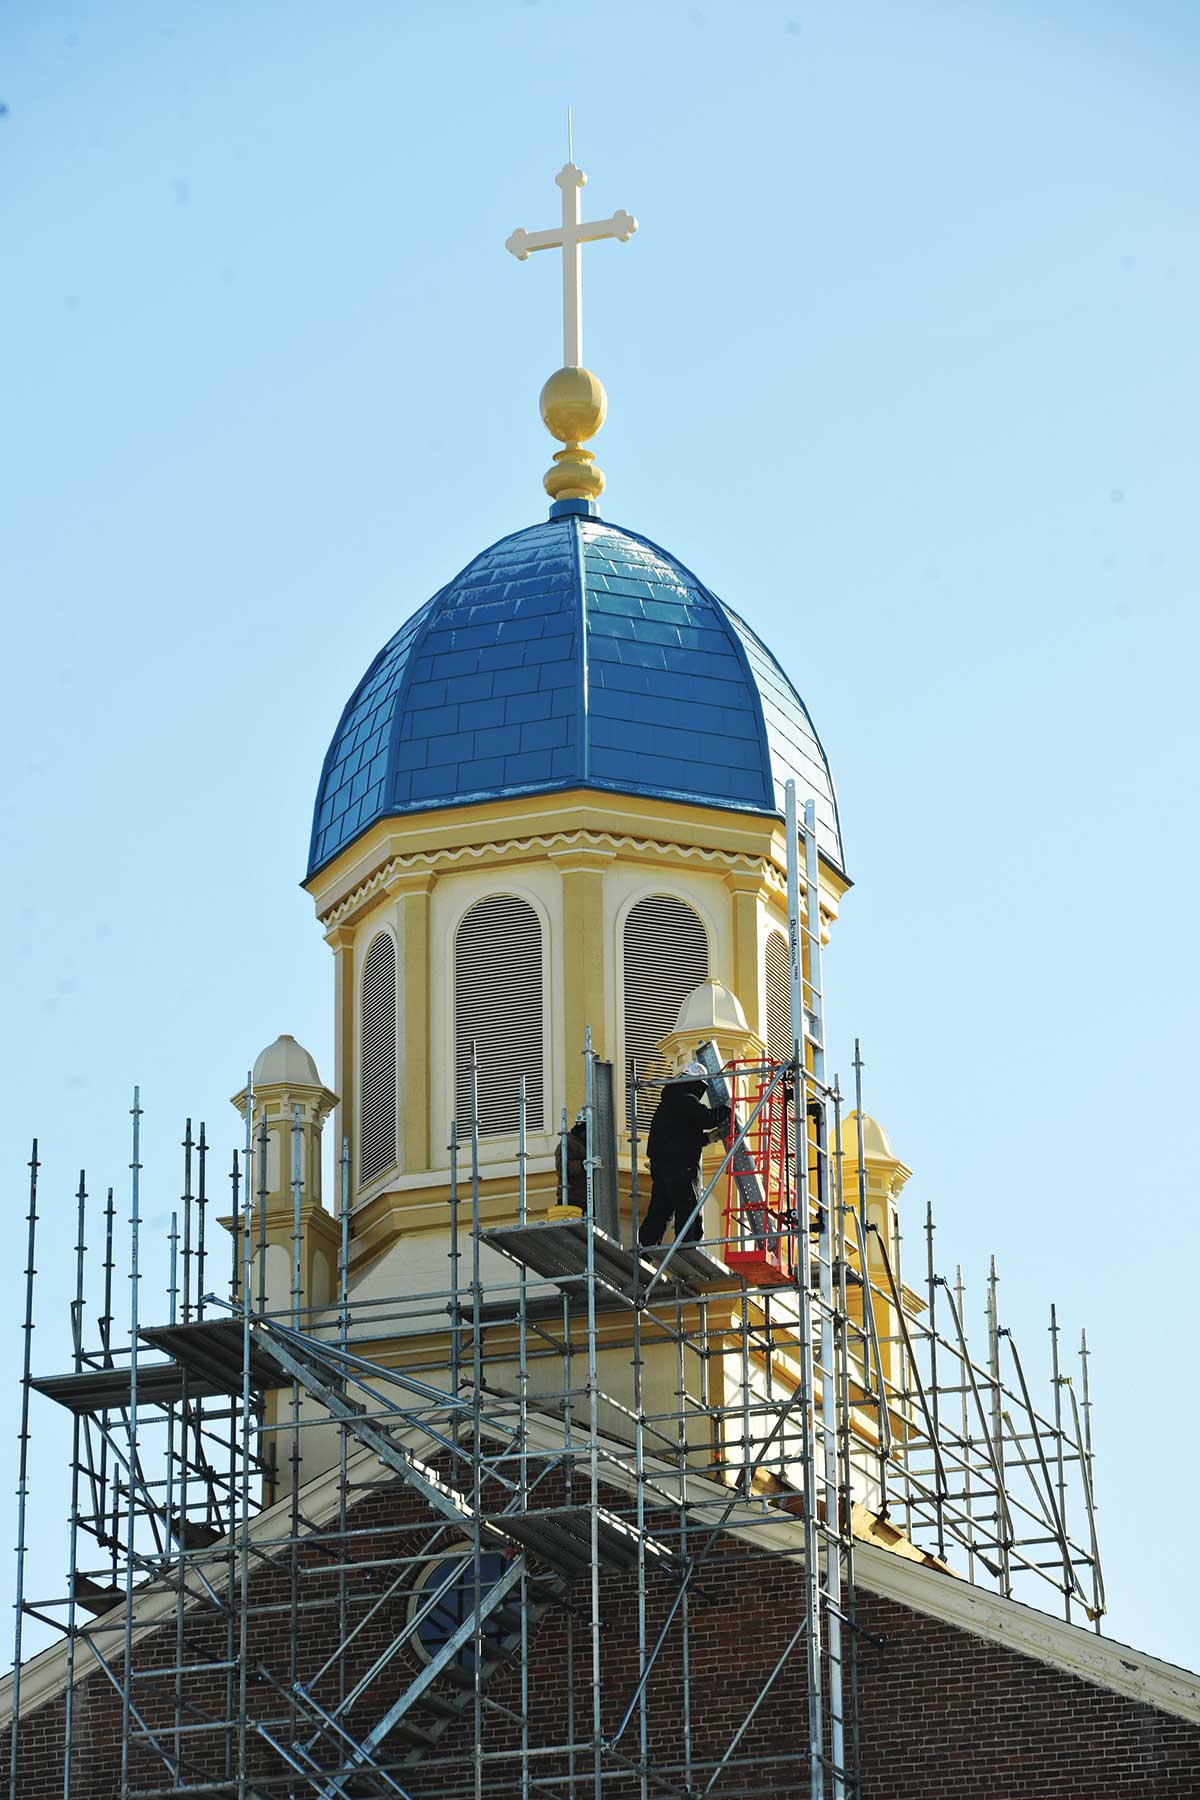 The chapel during its renovation with scaffolding around the dome.